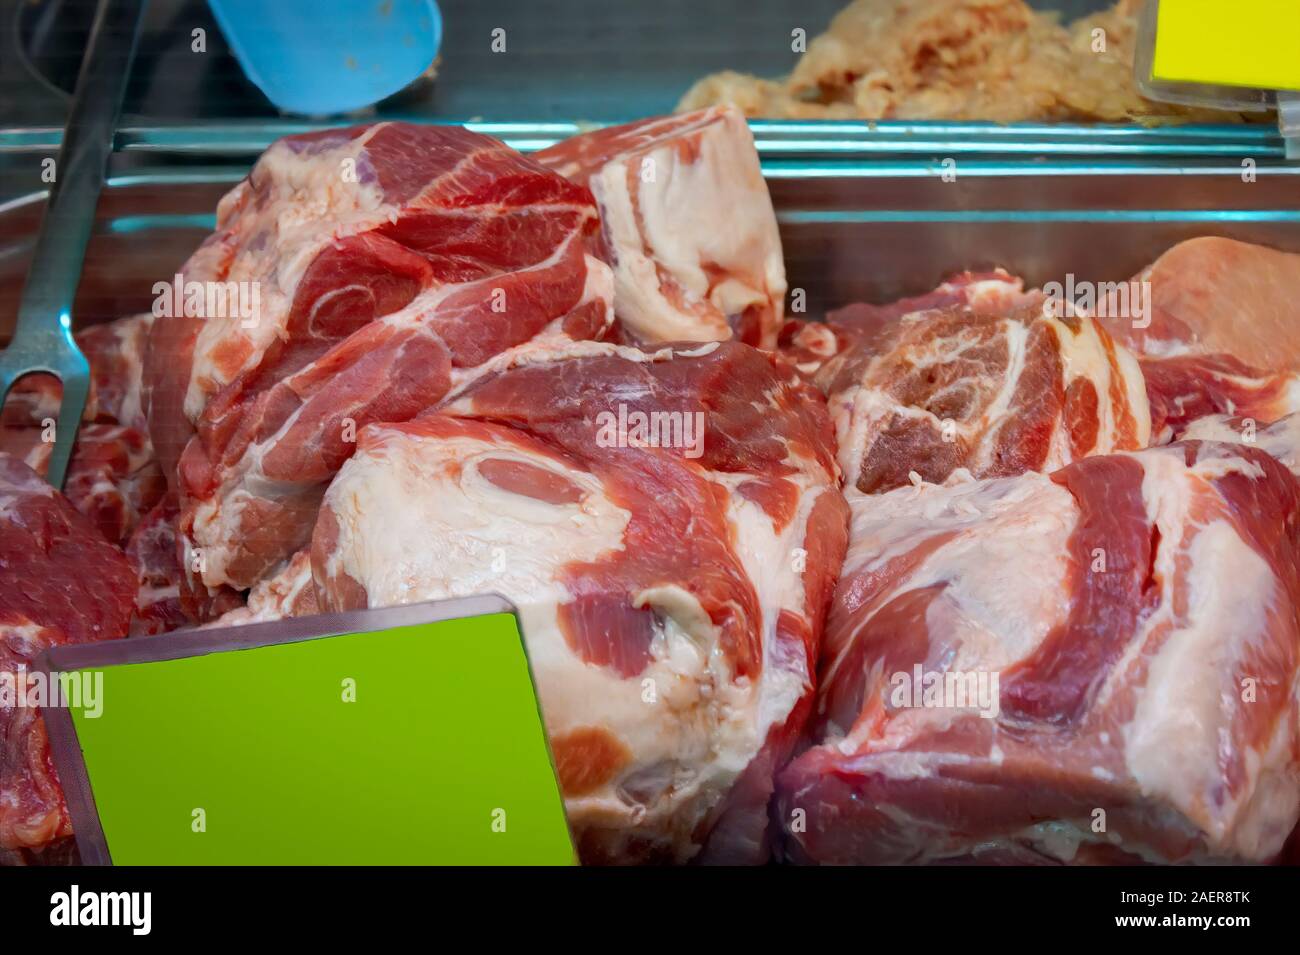 Pieces of raw meat at the grocery market. Pork fillet. High protein foods for cooking meat. Stock Photo